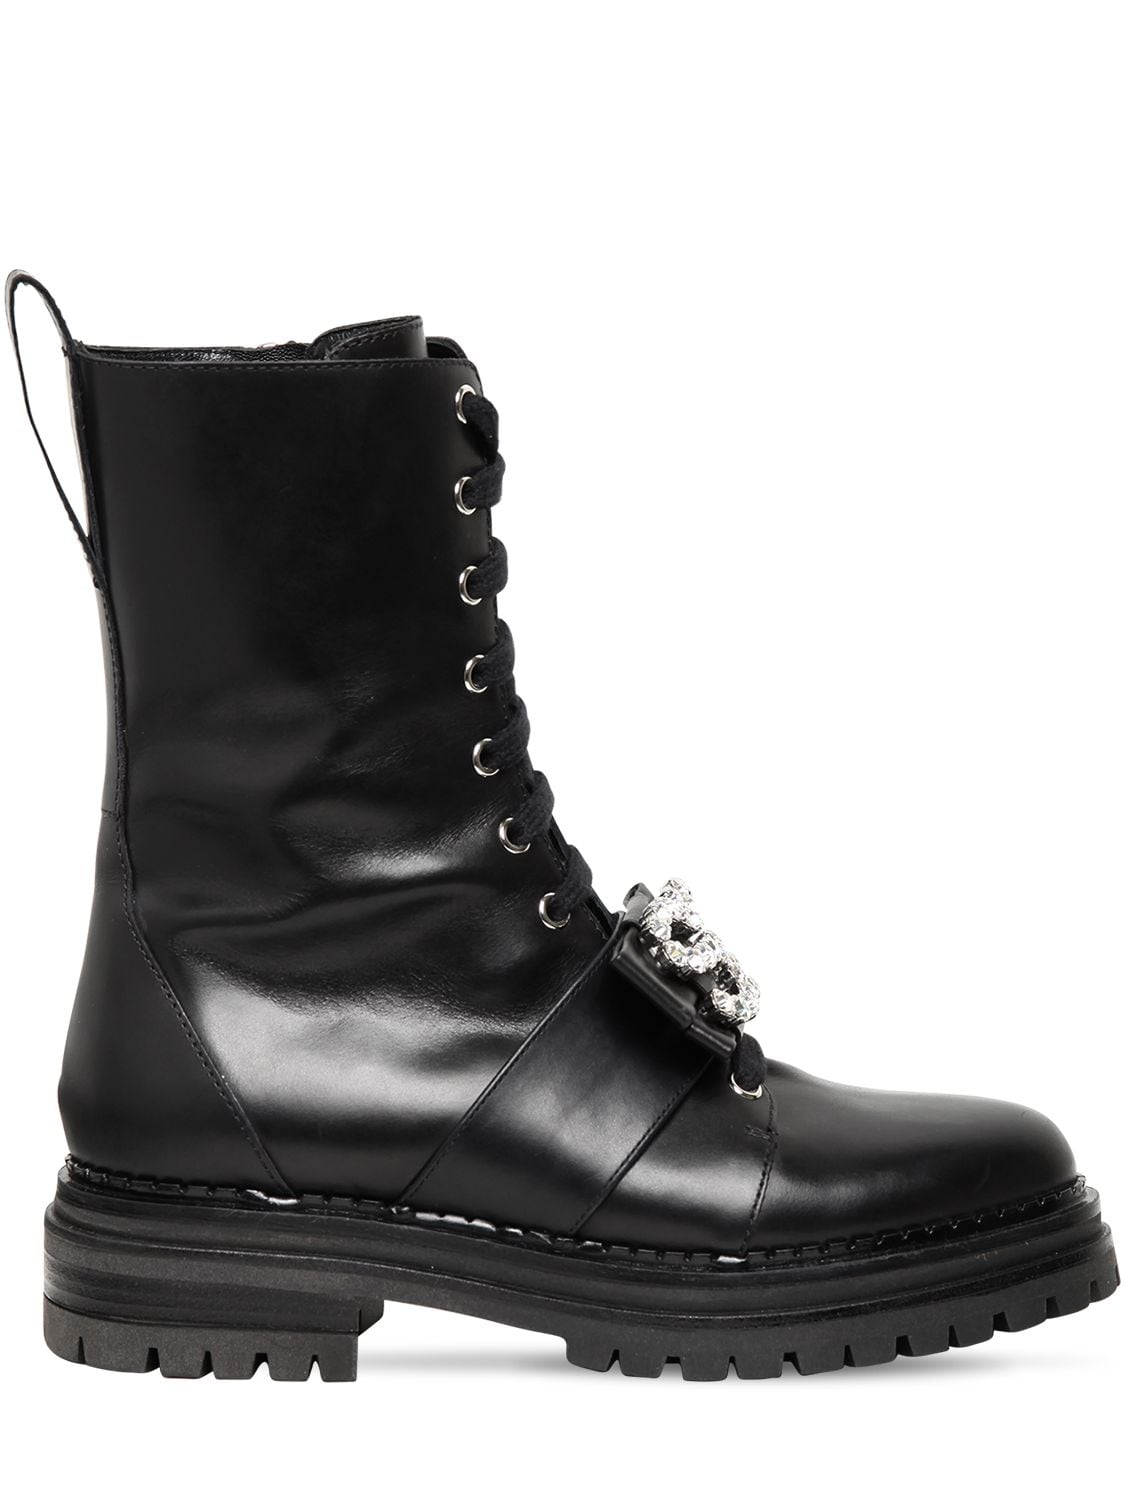 SERGIO ROSSI 40MM EMBELLISHED LEATHER COMBAT BOOTS,72IM1G010-MTAWMA2